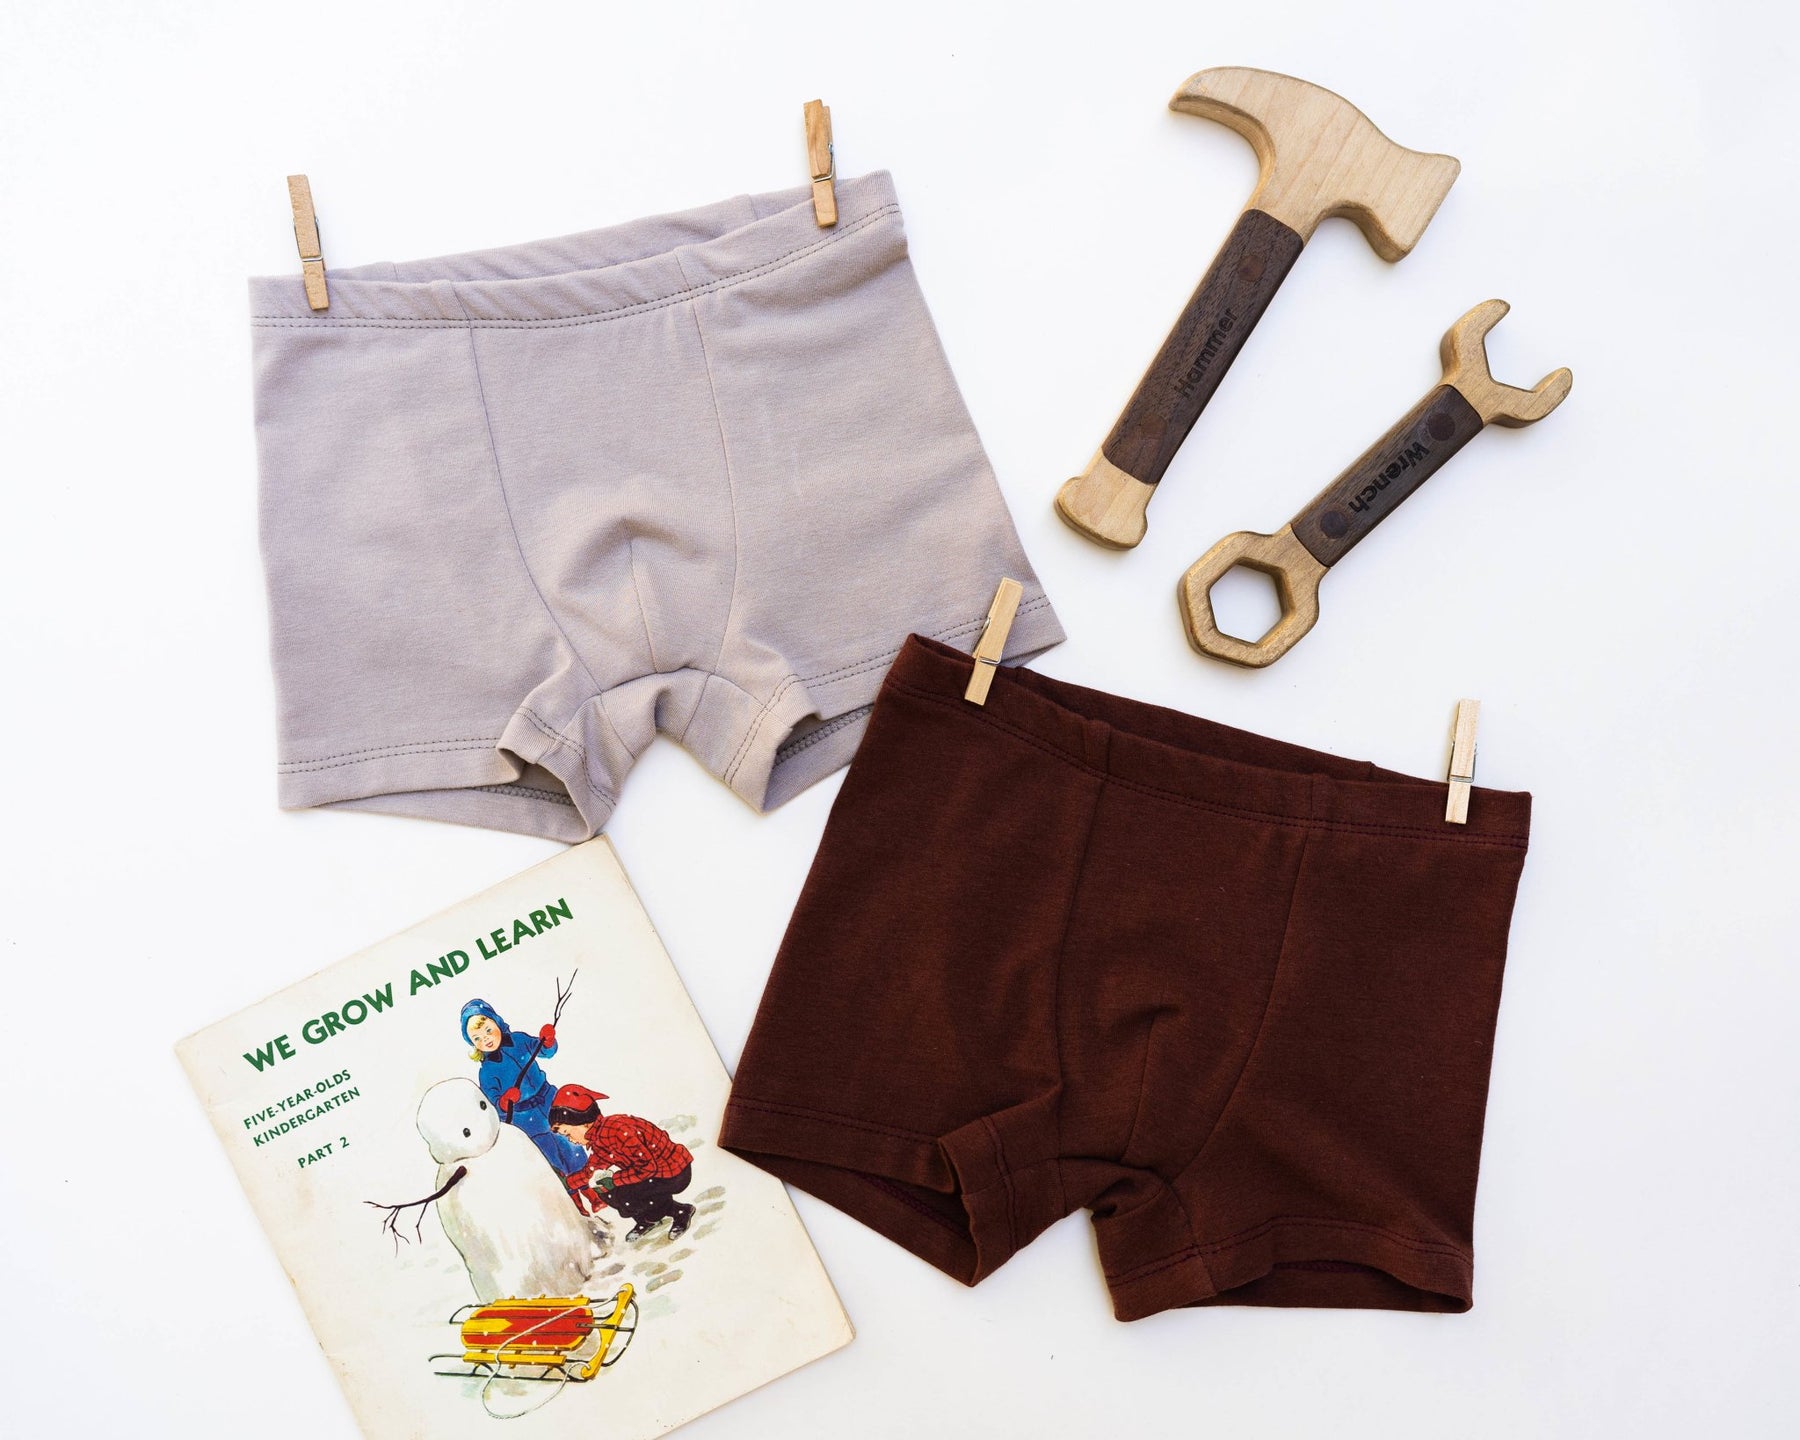 Gasolino Boy's boxer with drawings and writings: for sale at 3.99